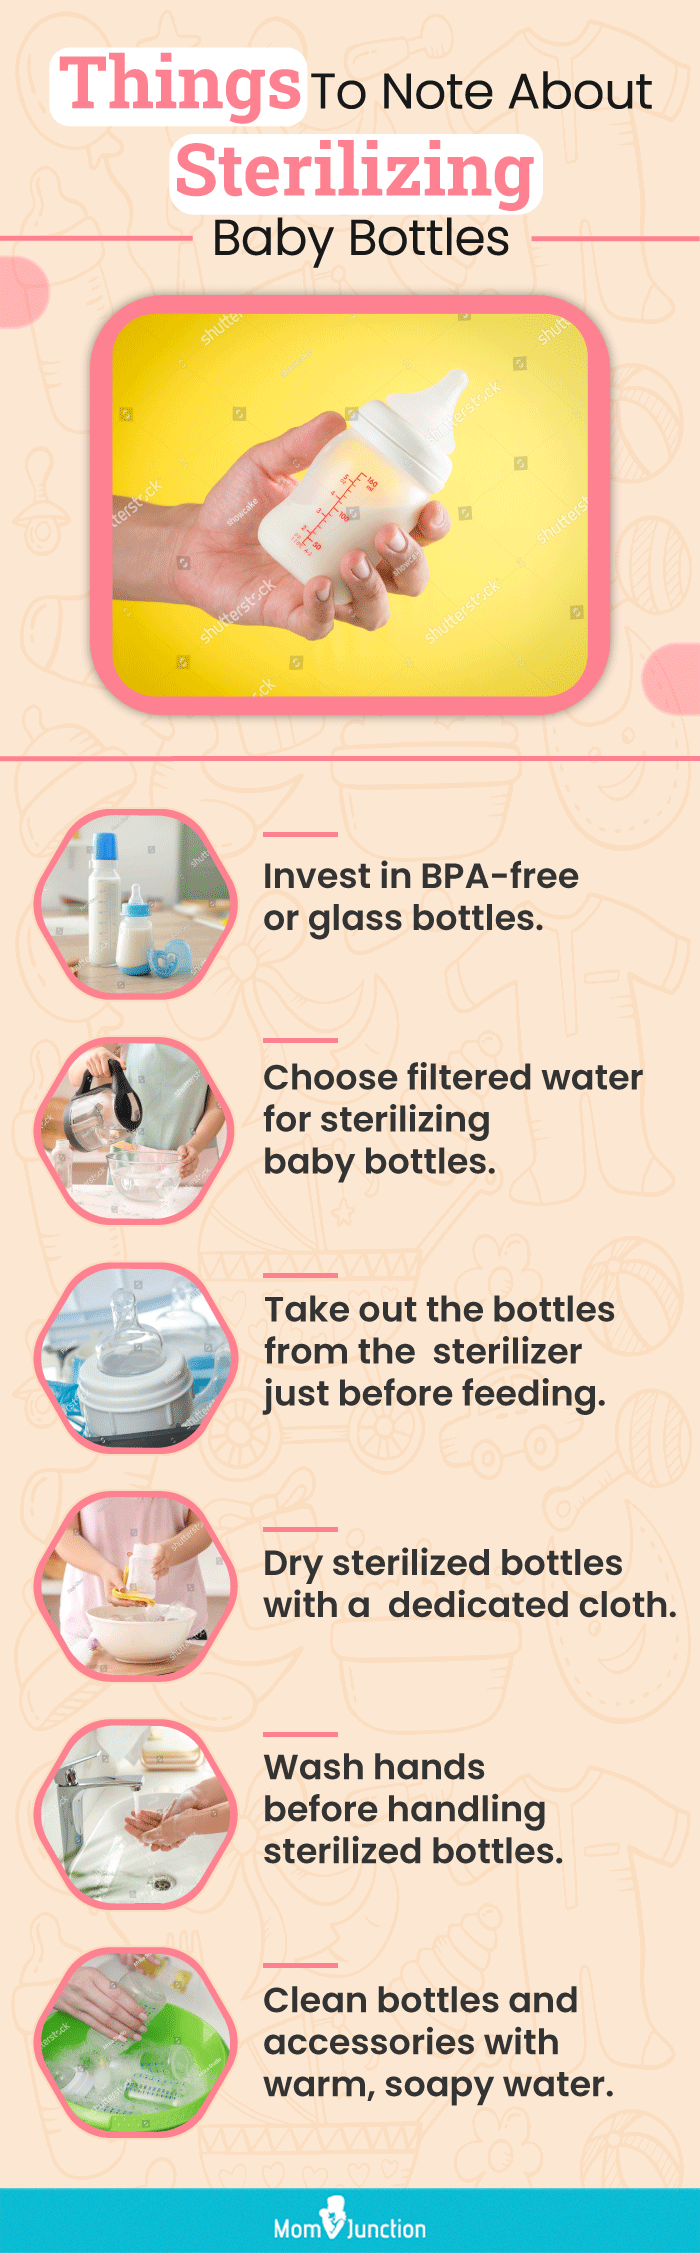 https://cdn2.momjunction.com/wp-content/uploads/2023/01/Things-to-note-about-sterilizing-Baby-Bottles.gif